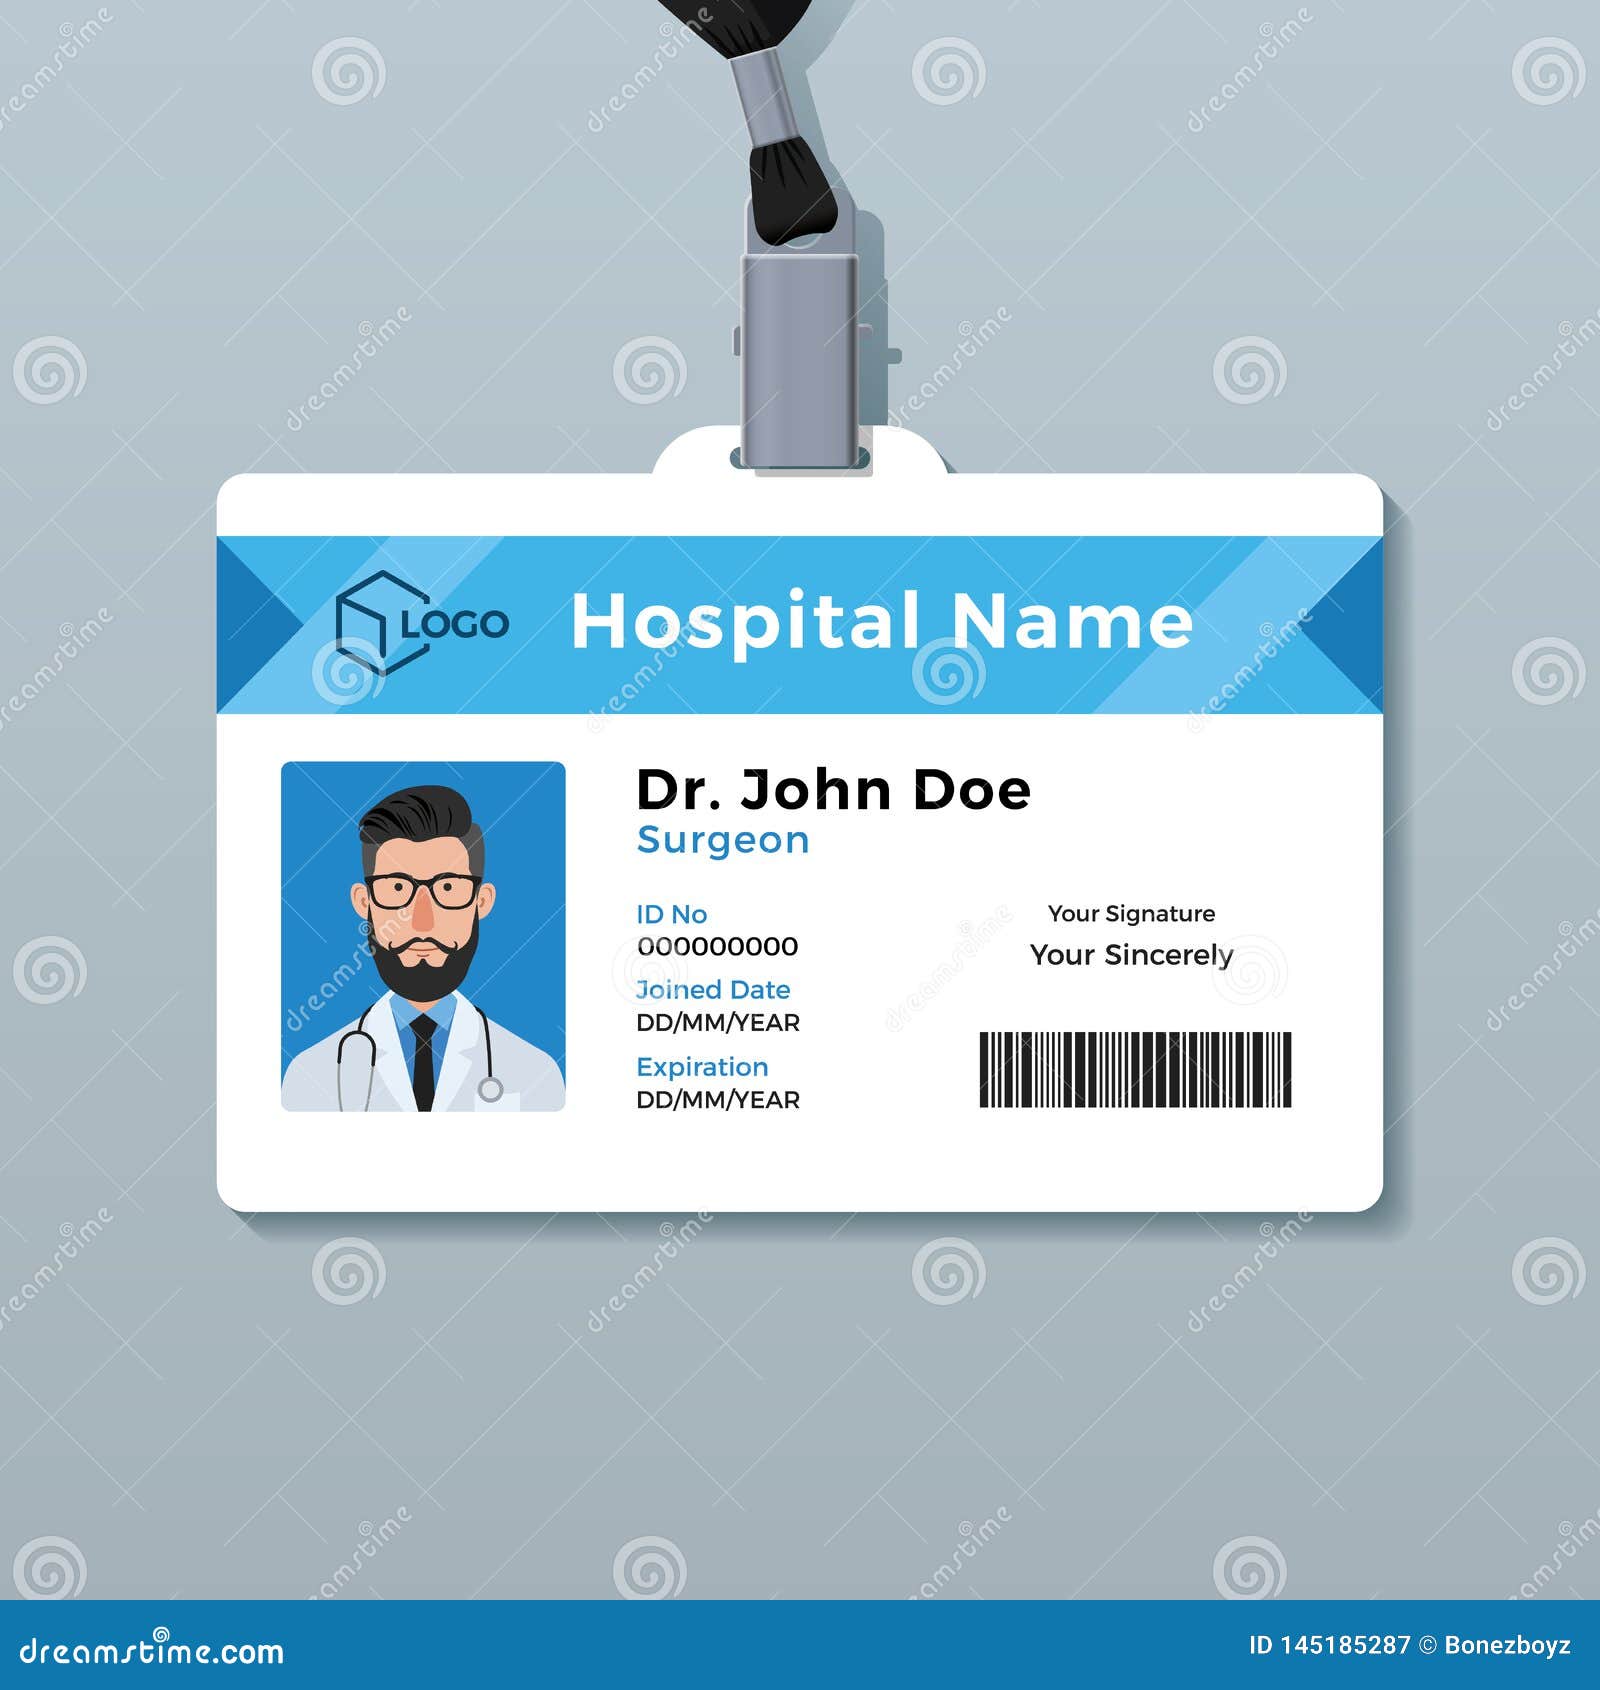 Doctor ID Card Template. Medical Identity Badge Stock Vector Within Personal Identification Card Template